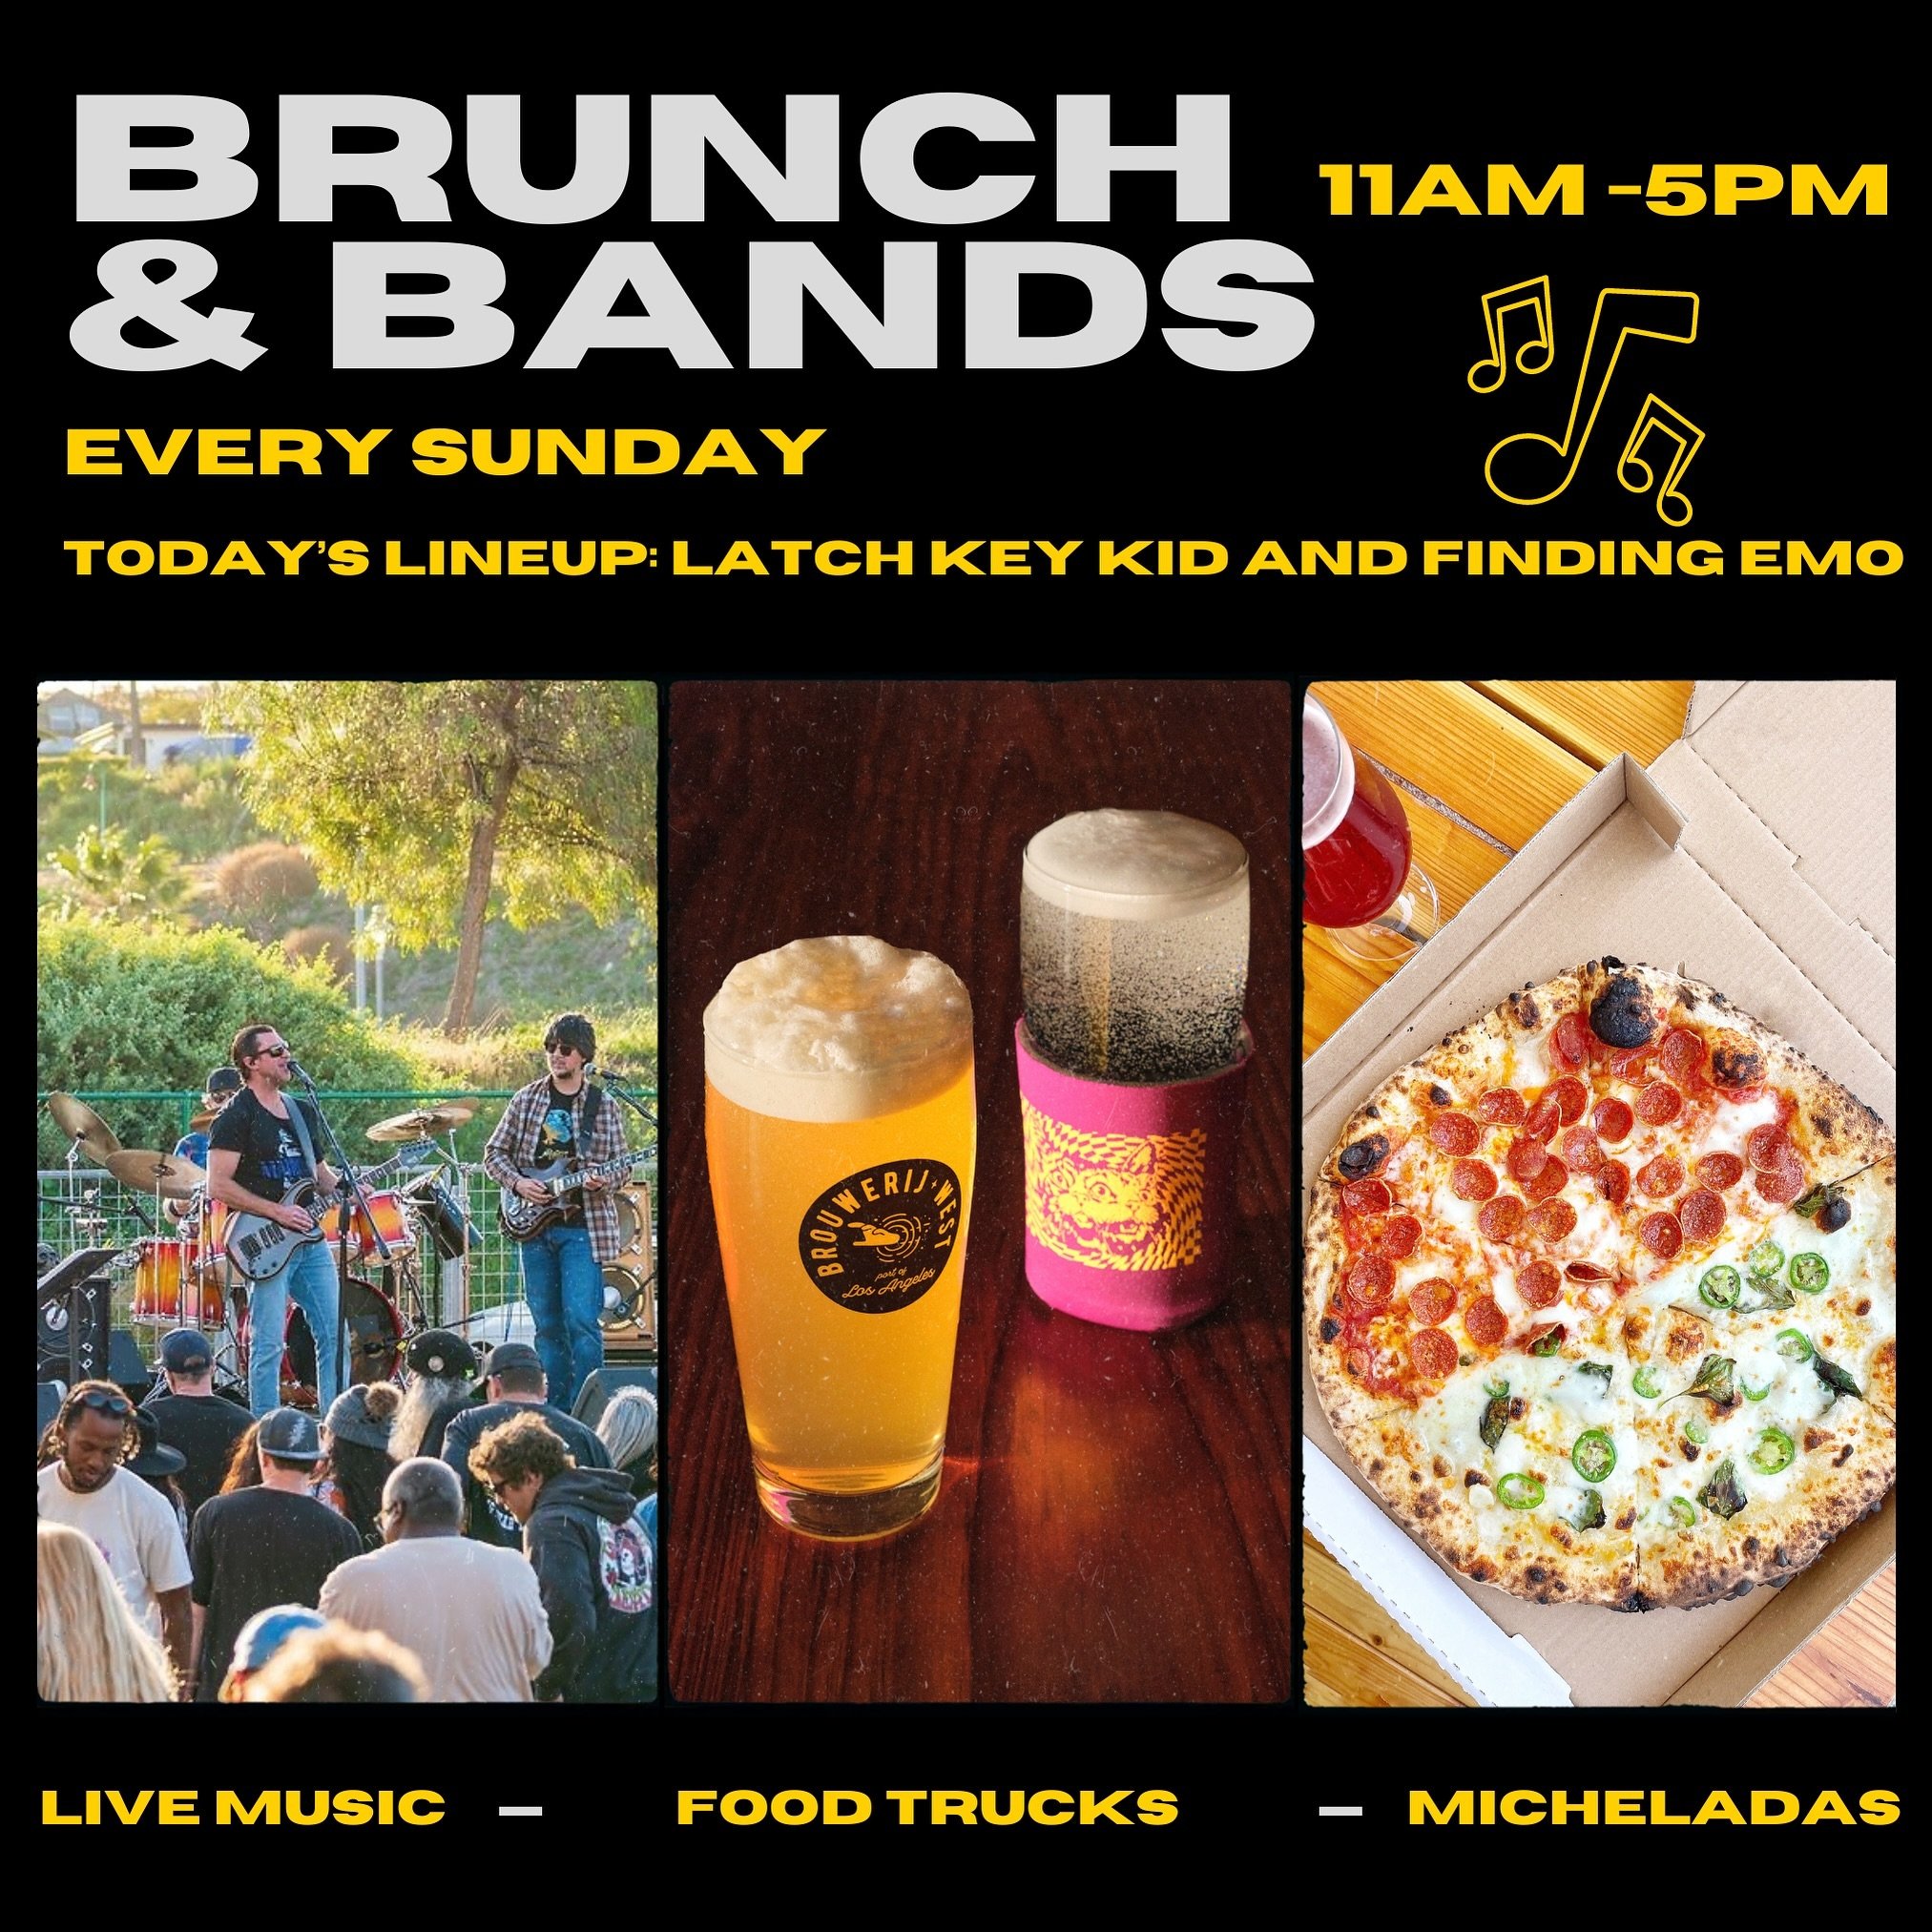 It&rsquo;s been a wild weekend 💃 🪩 🕺 thanks so much to everyone that joined us for La Bota and Retro Festival! 

The fun doesn&rsquo;t stop 🎶 Today&rsquo;s Brunch &amp; Bands is heatin&rsquo; up with FREE, LIVE MUSIC - ALL DAY! We have some fun b